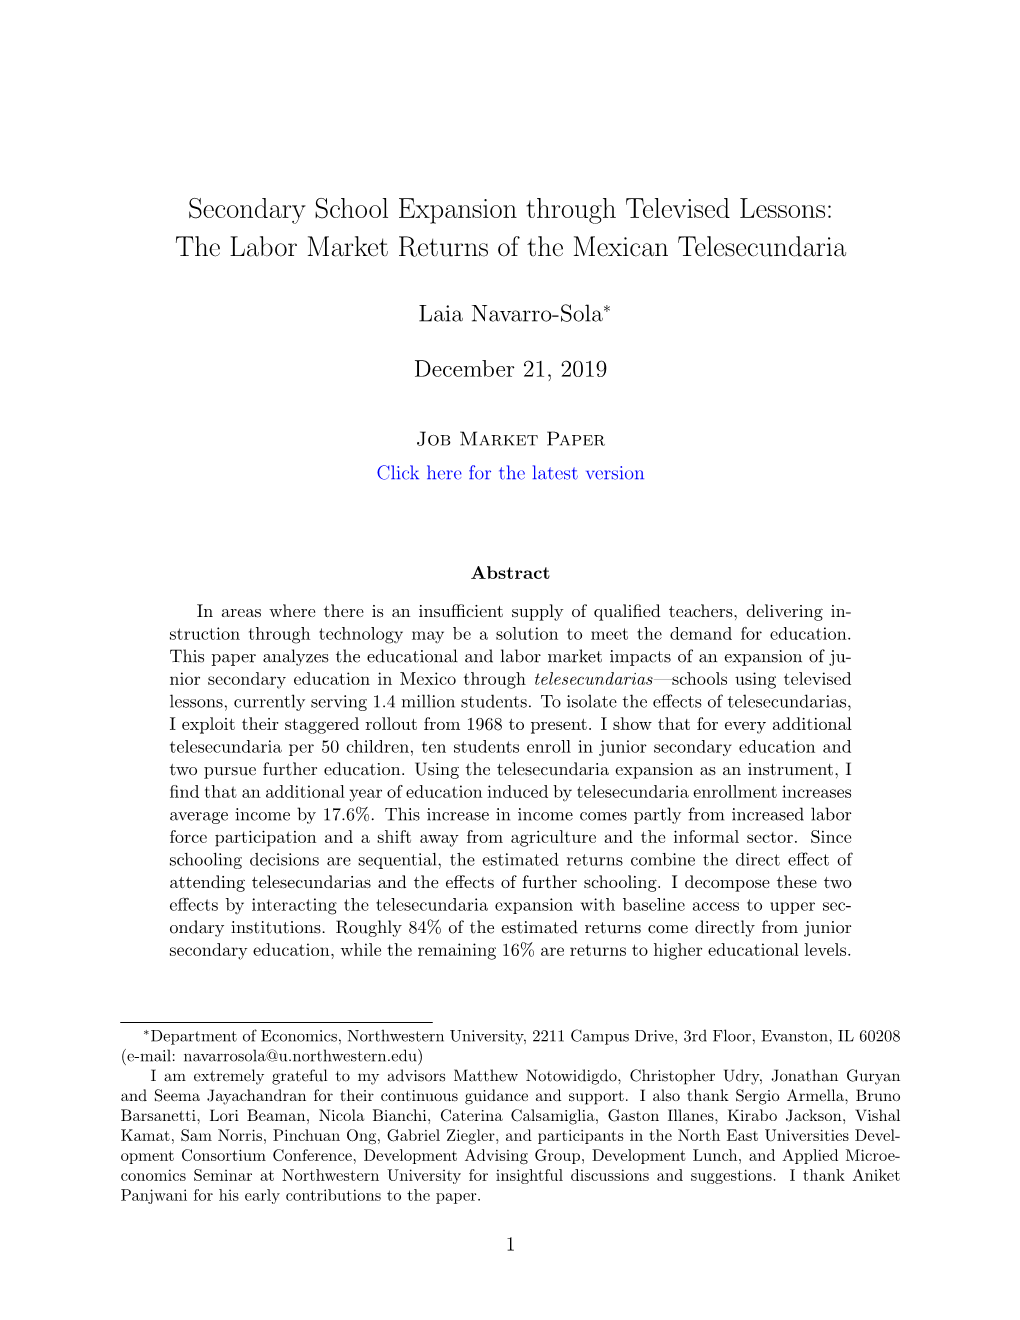 Secondary School Expansion Through Televised Lessons: the Labor Market Returns of the Mexican Telesecundaria